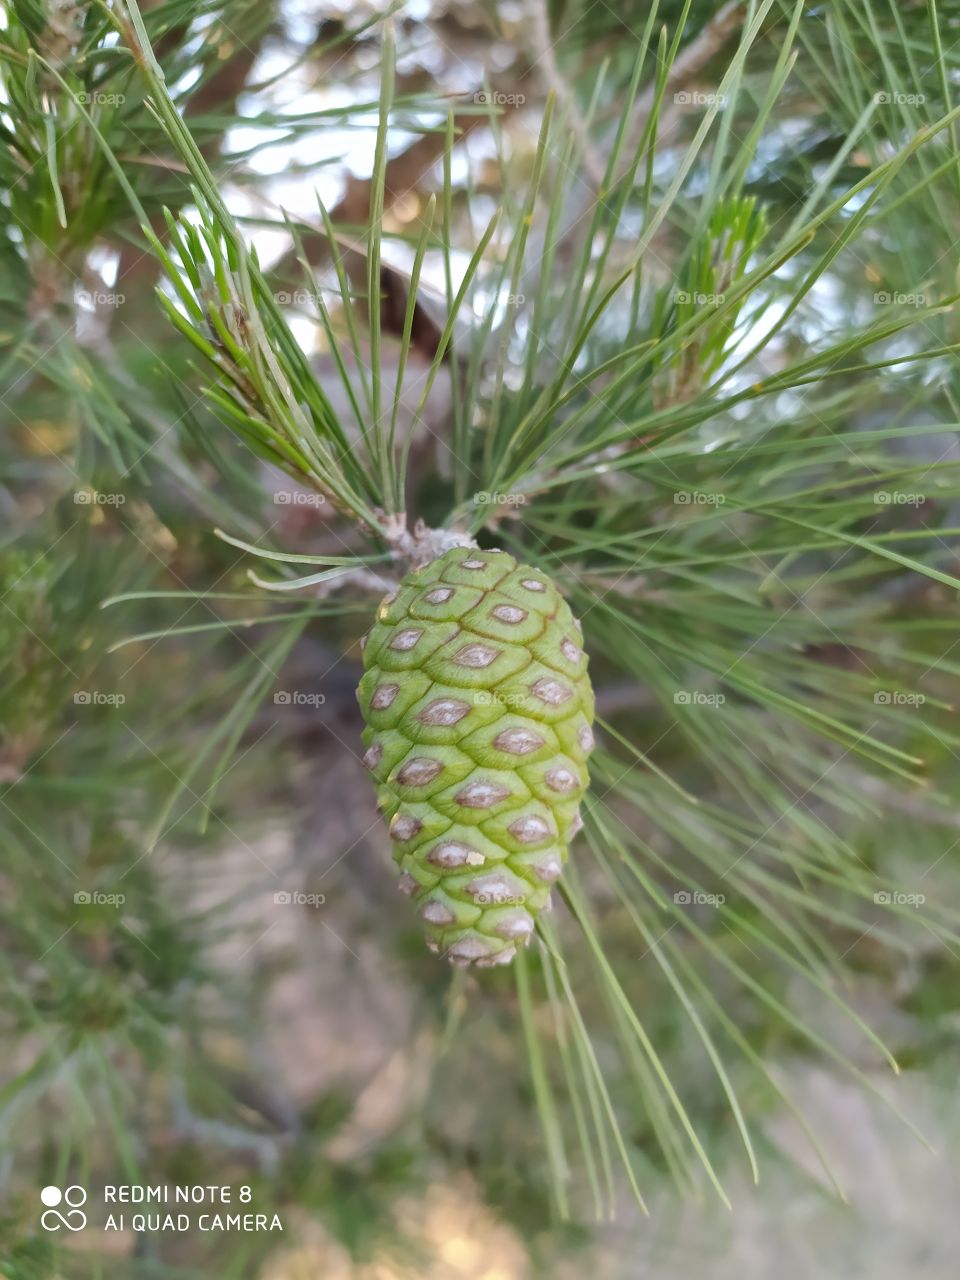 Pine nuts, nature, green, life, jungle